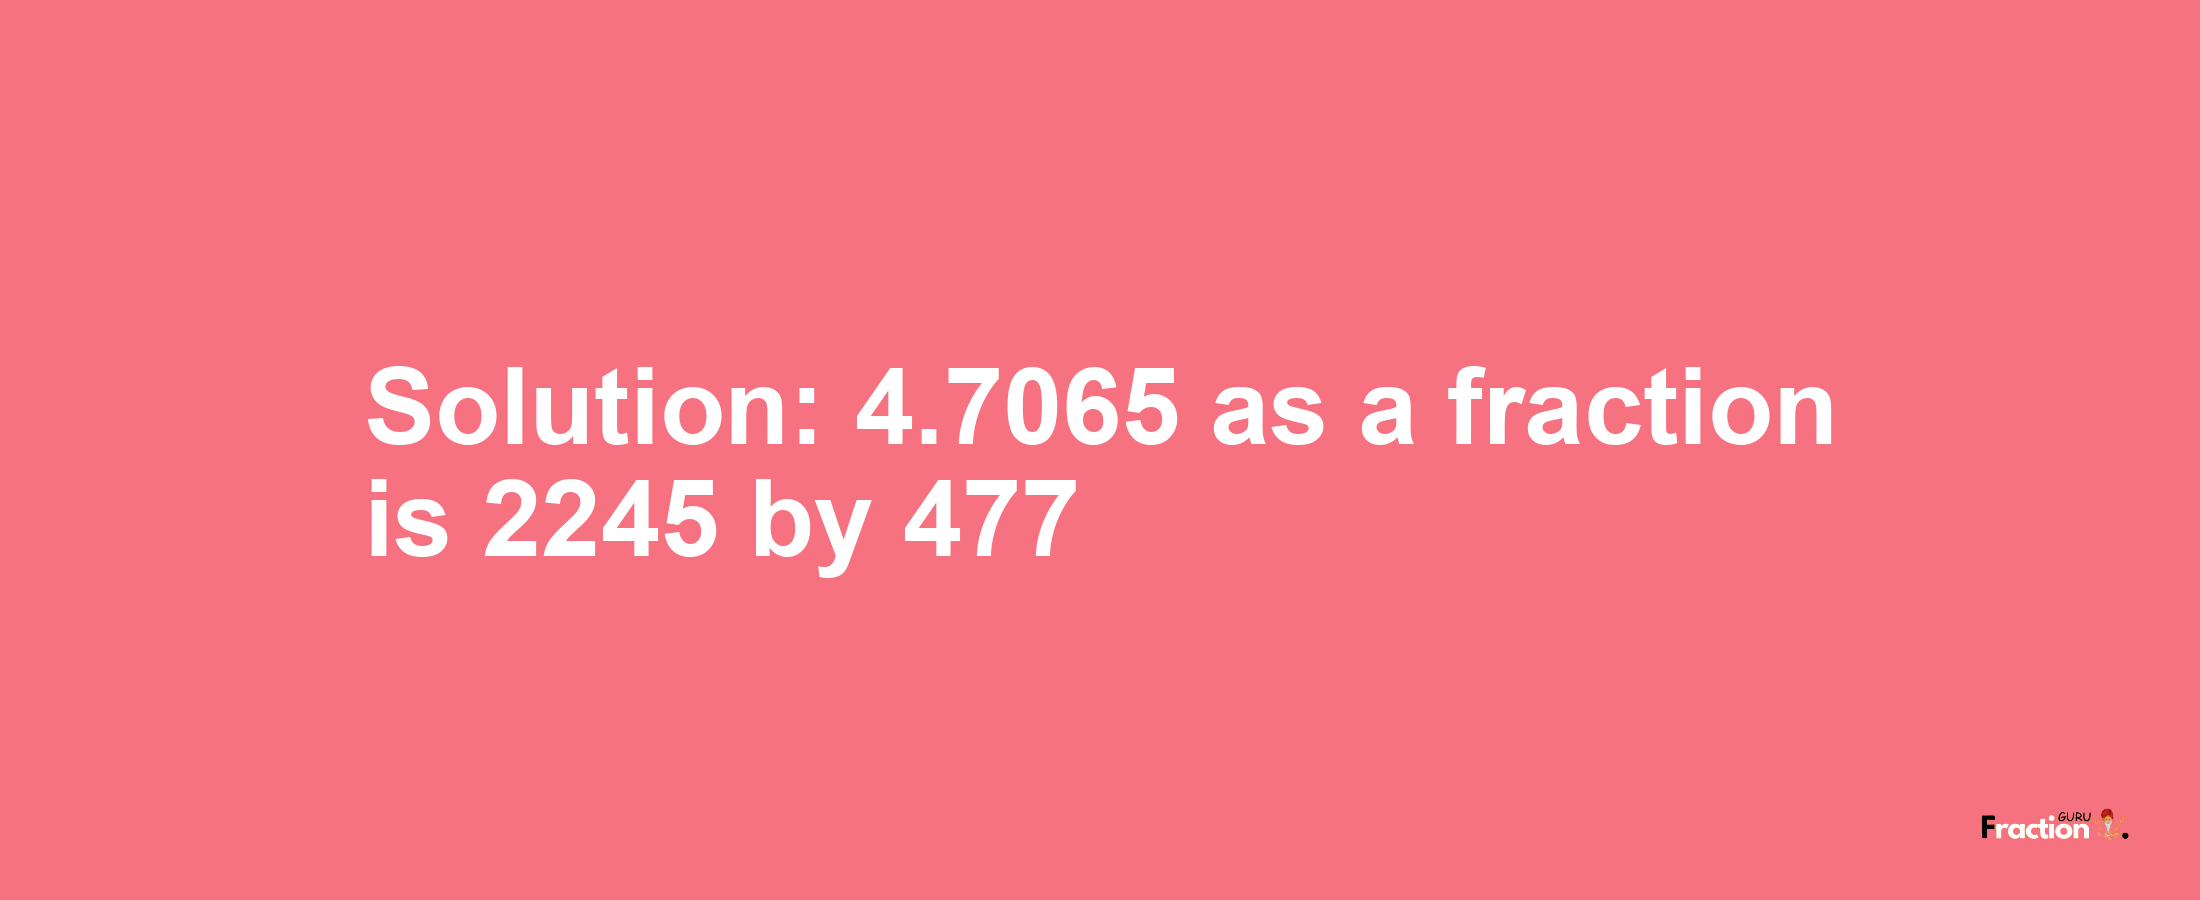 Solution:4.7065 as a fraction is 2245/477